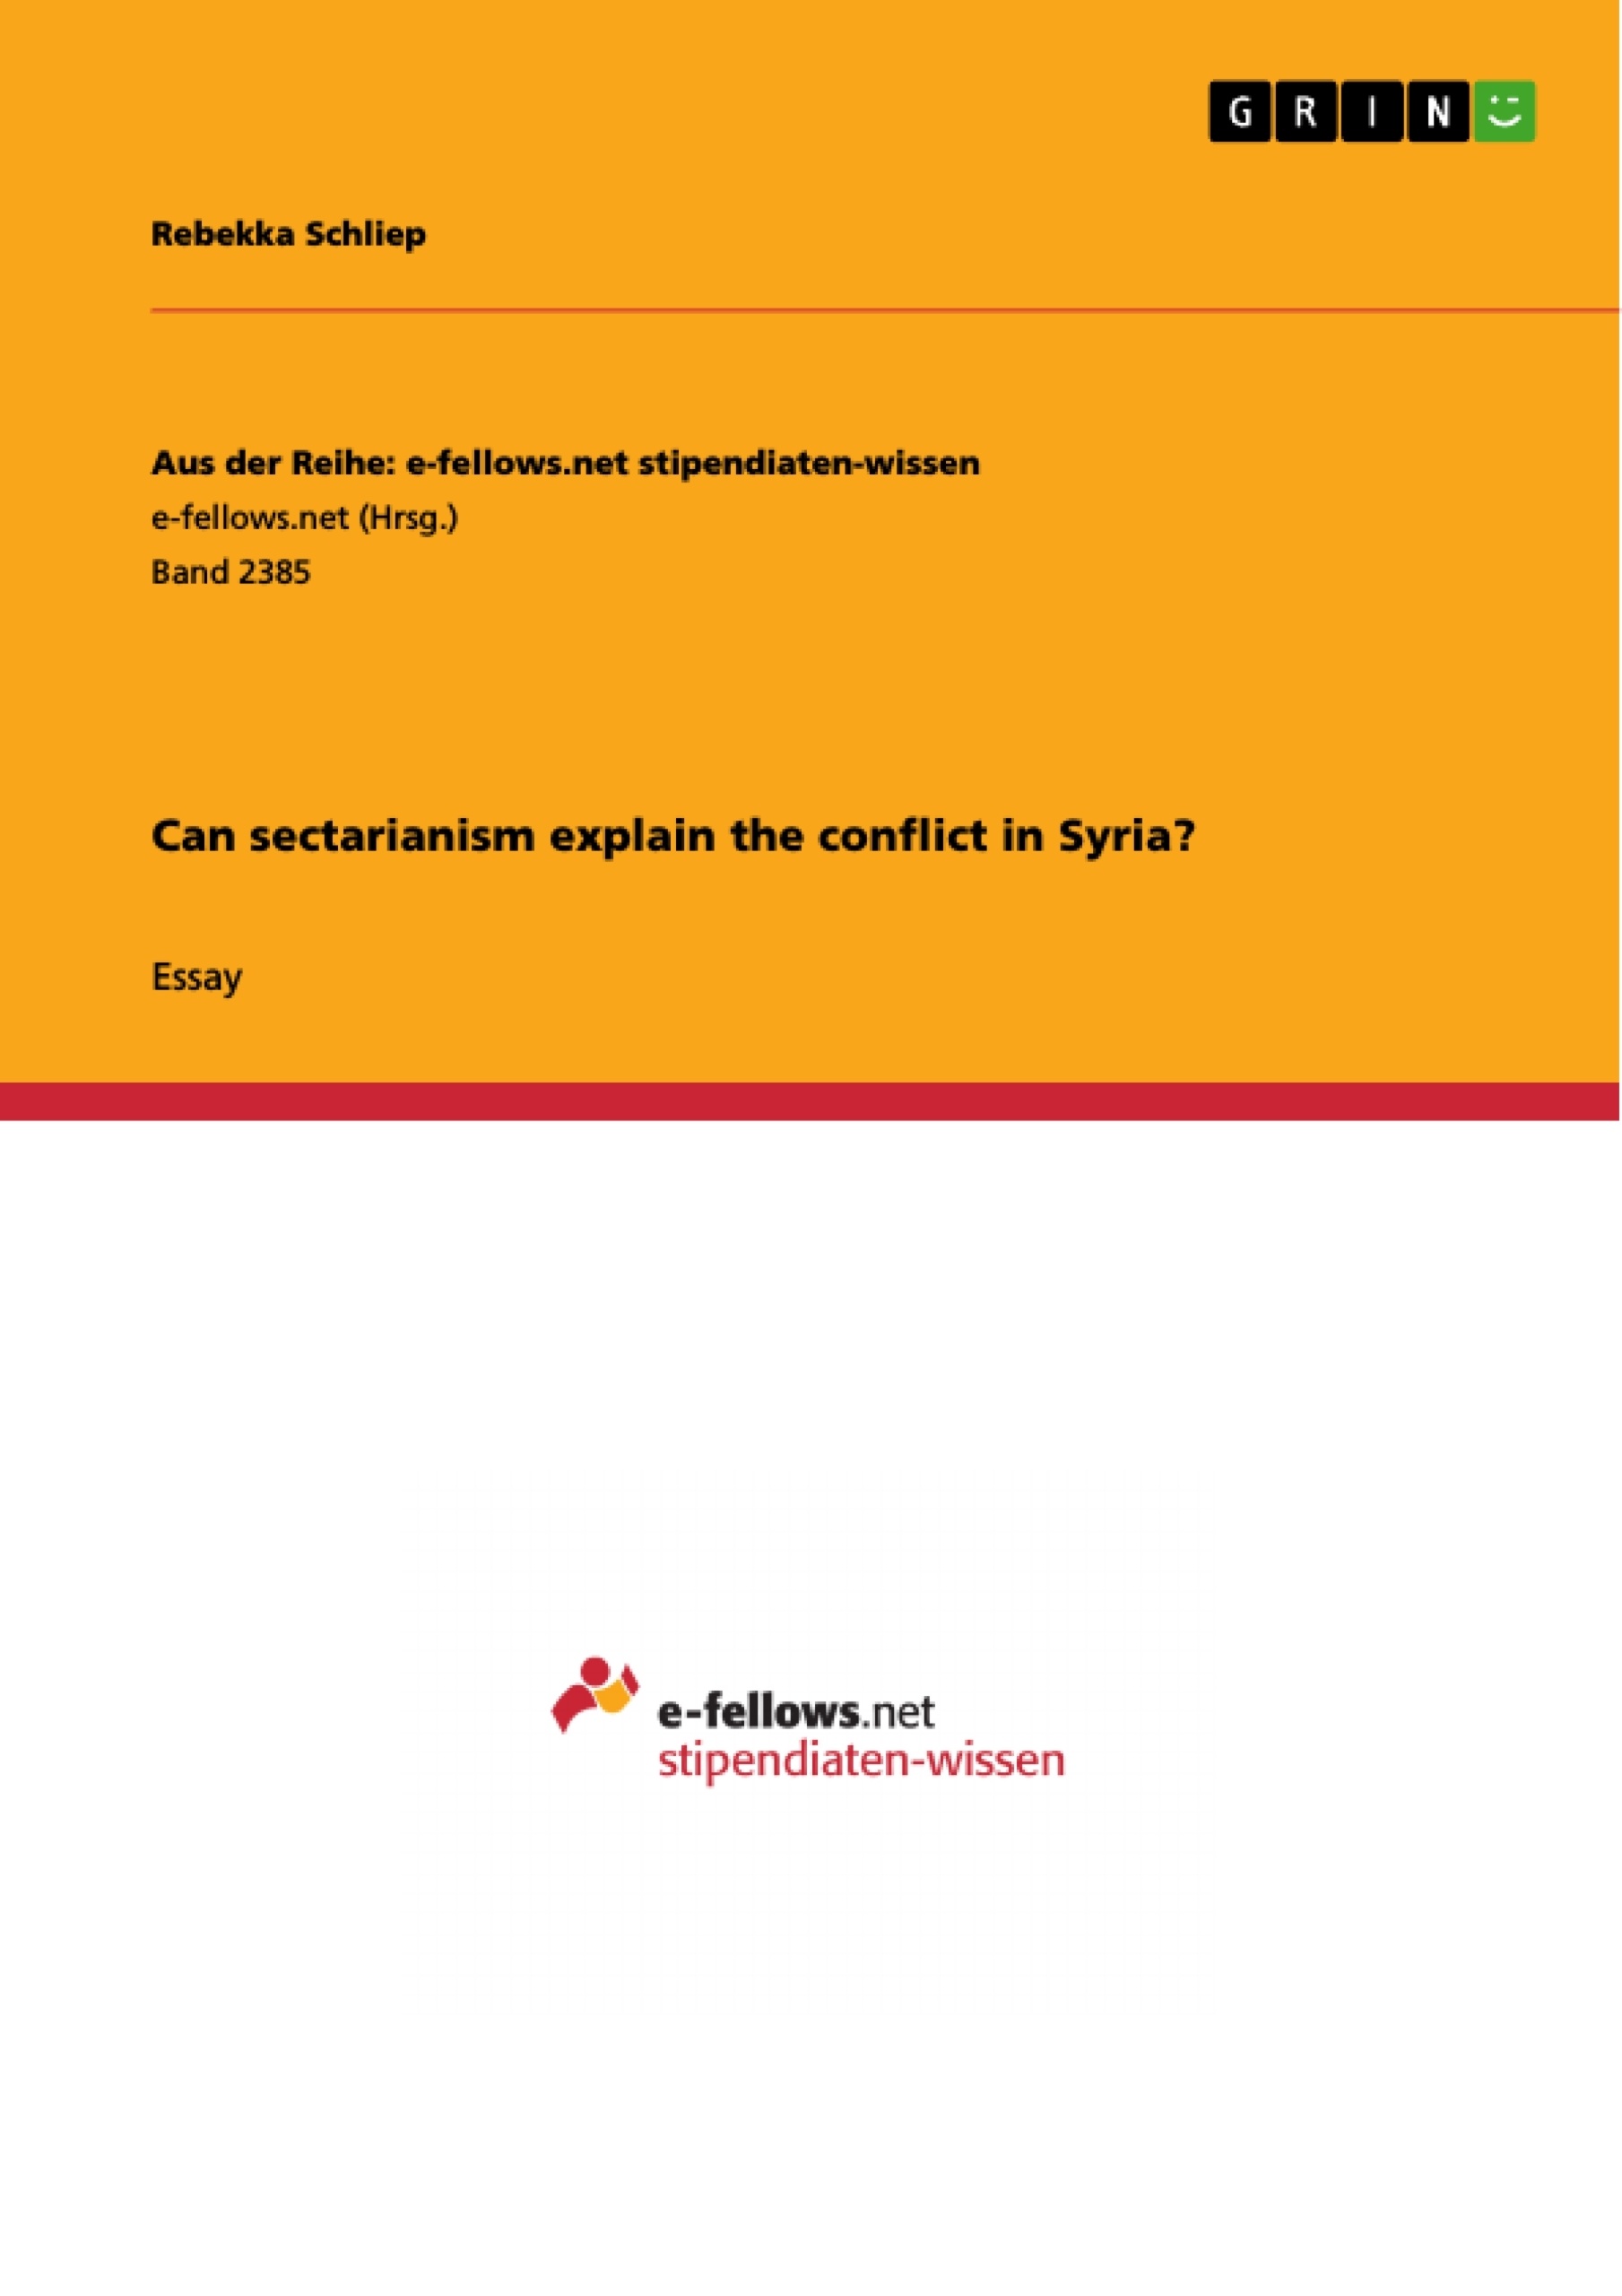 Titre: Can sectarianism explain the conflict in Syria?